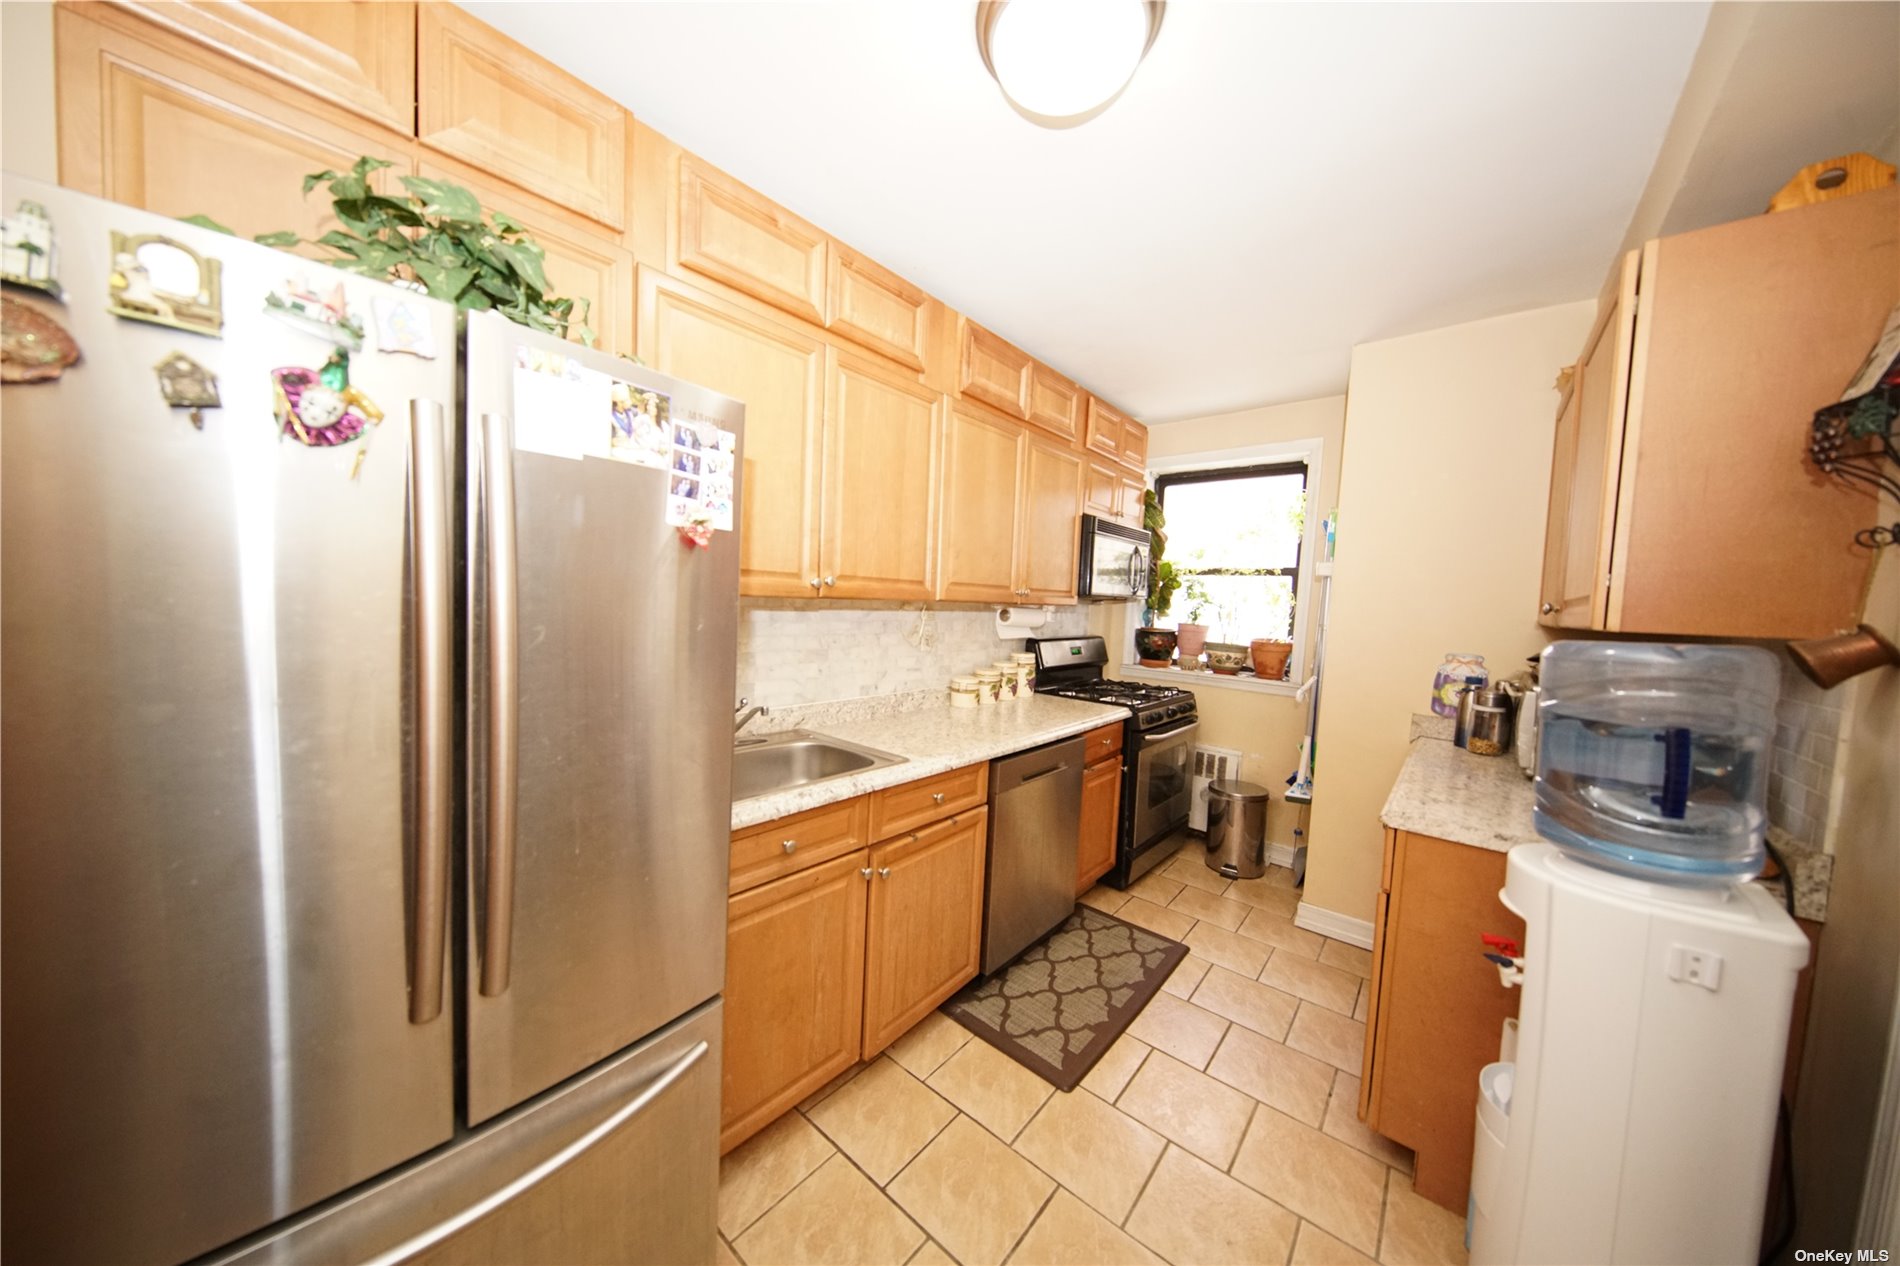 a kitchen with stainless steel appliances a refrigerator sink and cabinets